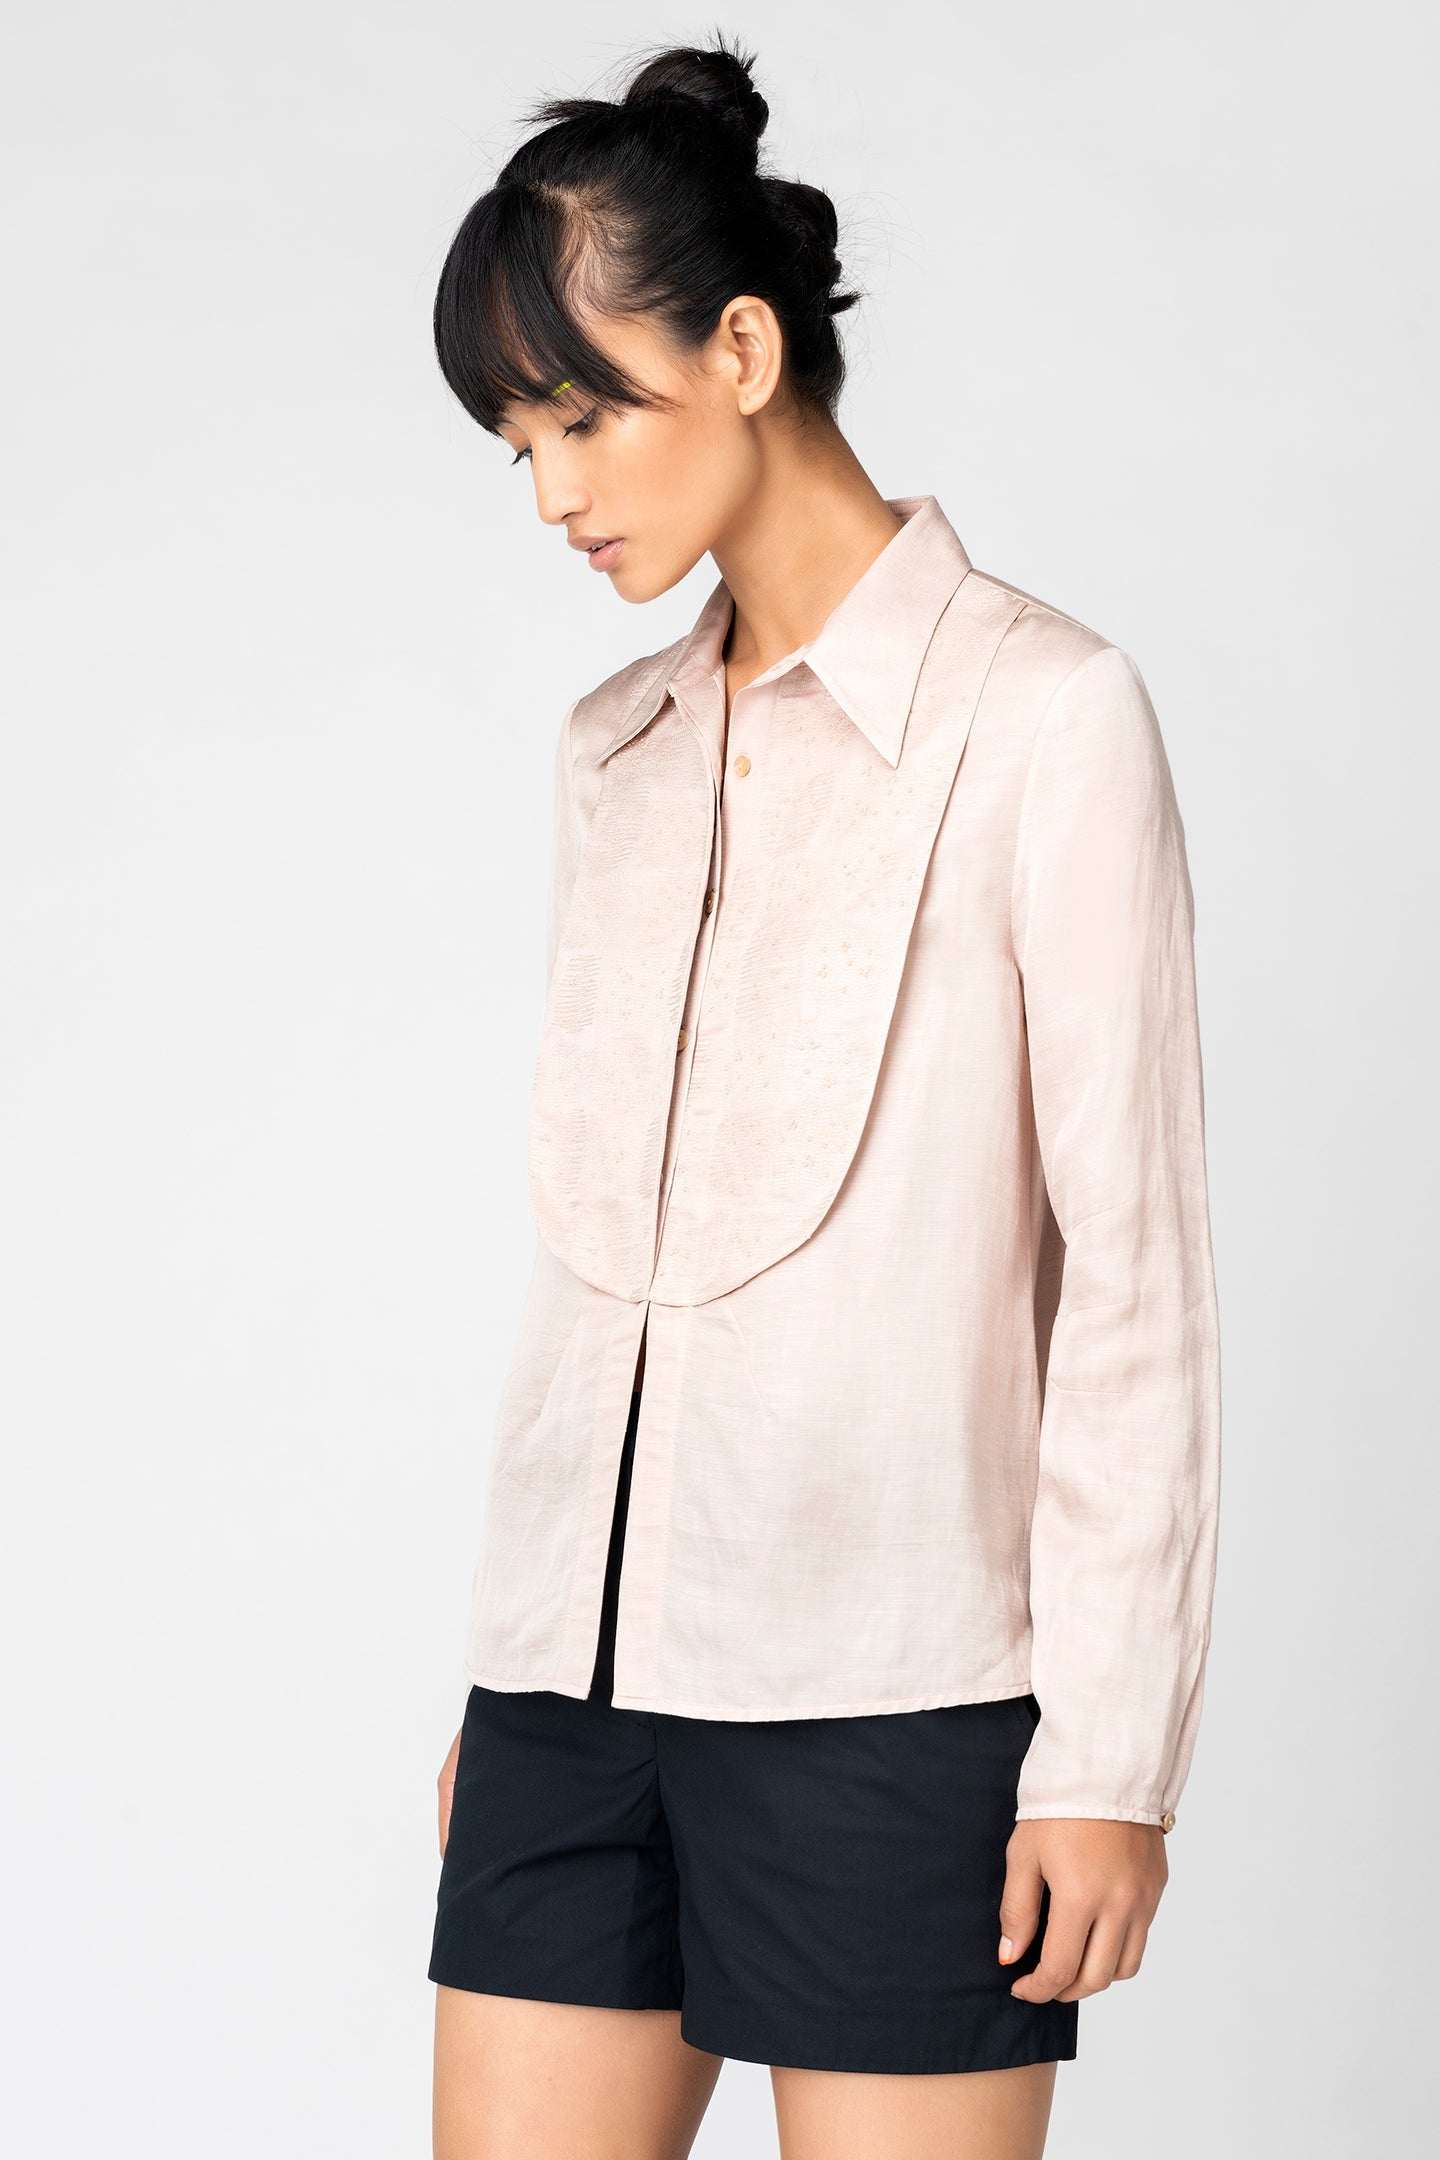 embroidered-satin-shirt - Genes online store 2020